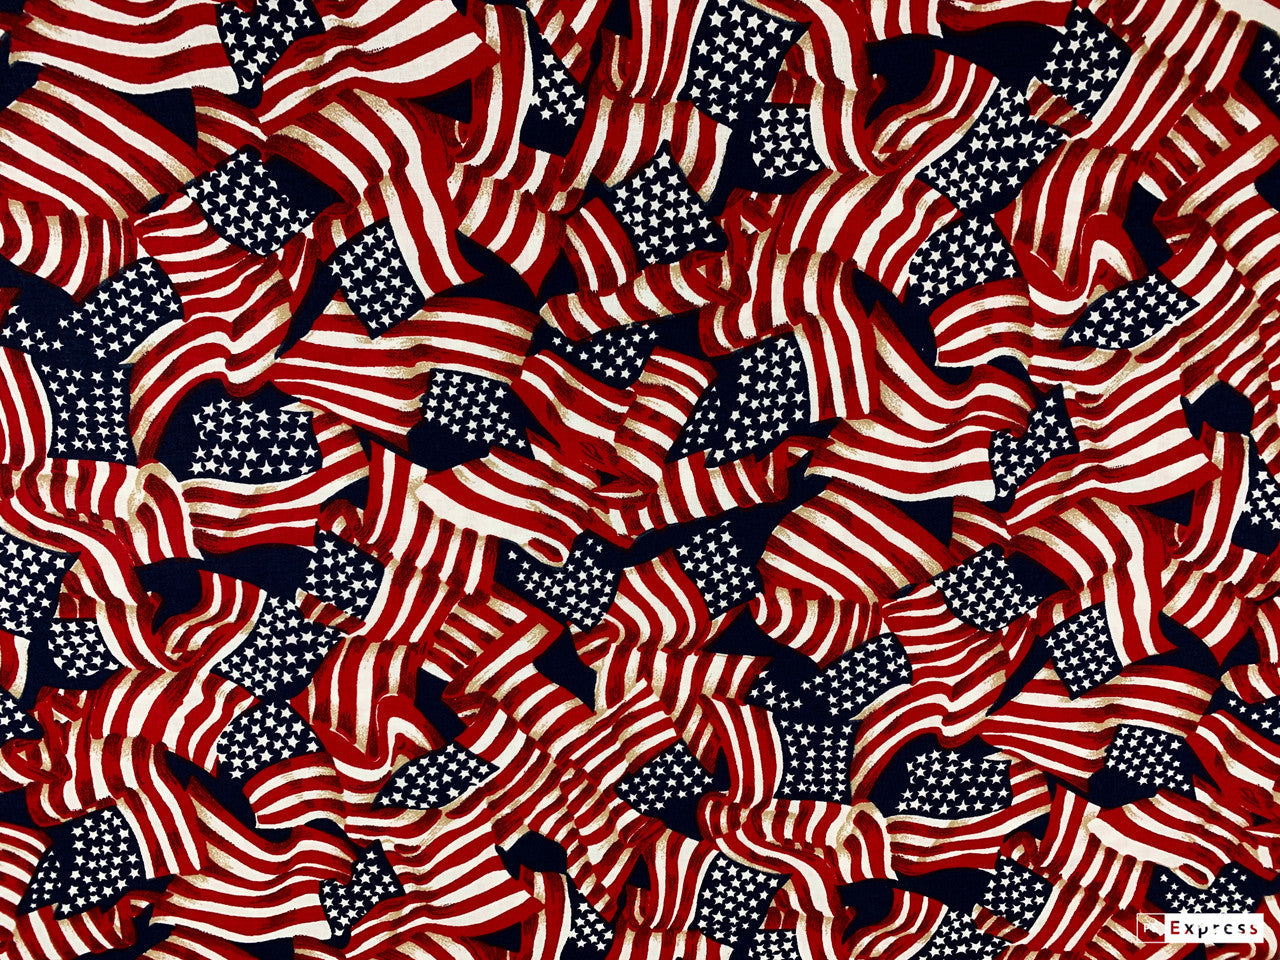 Navy Blue USA flag cotton fabric 41355 Red White Blue patriotic fabric